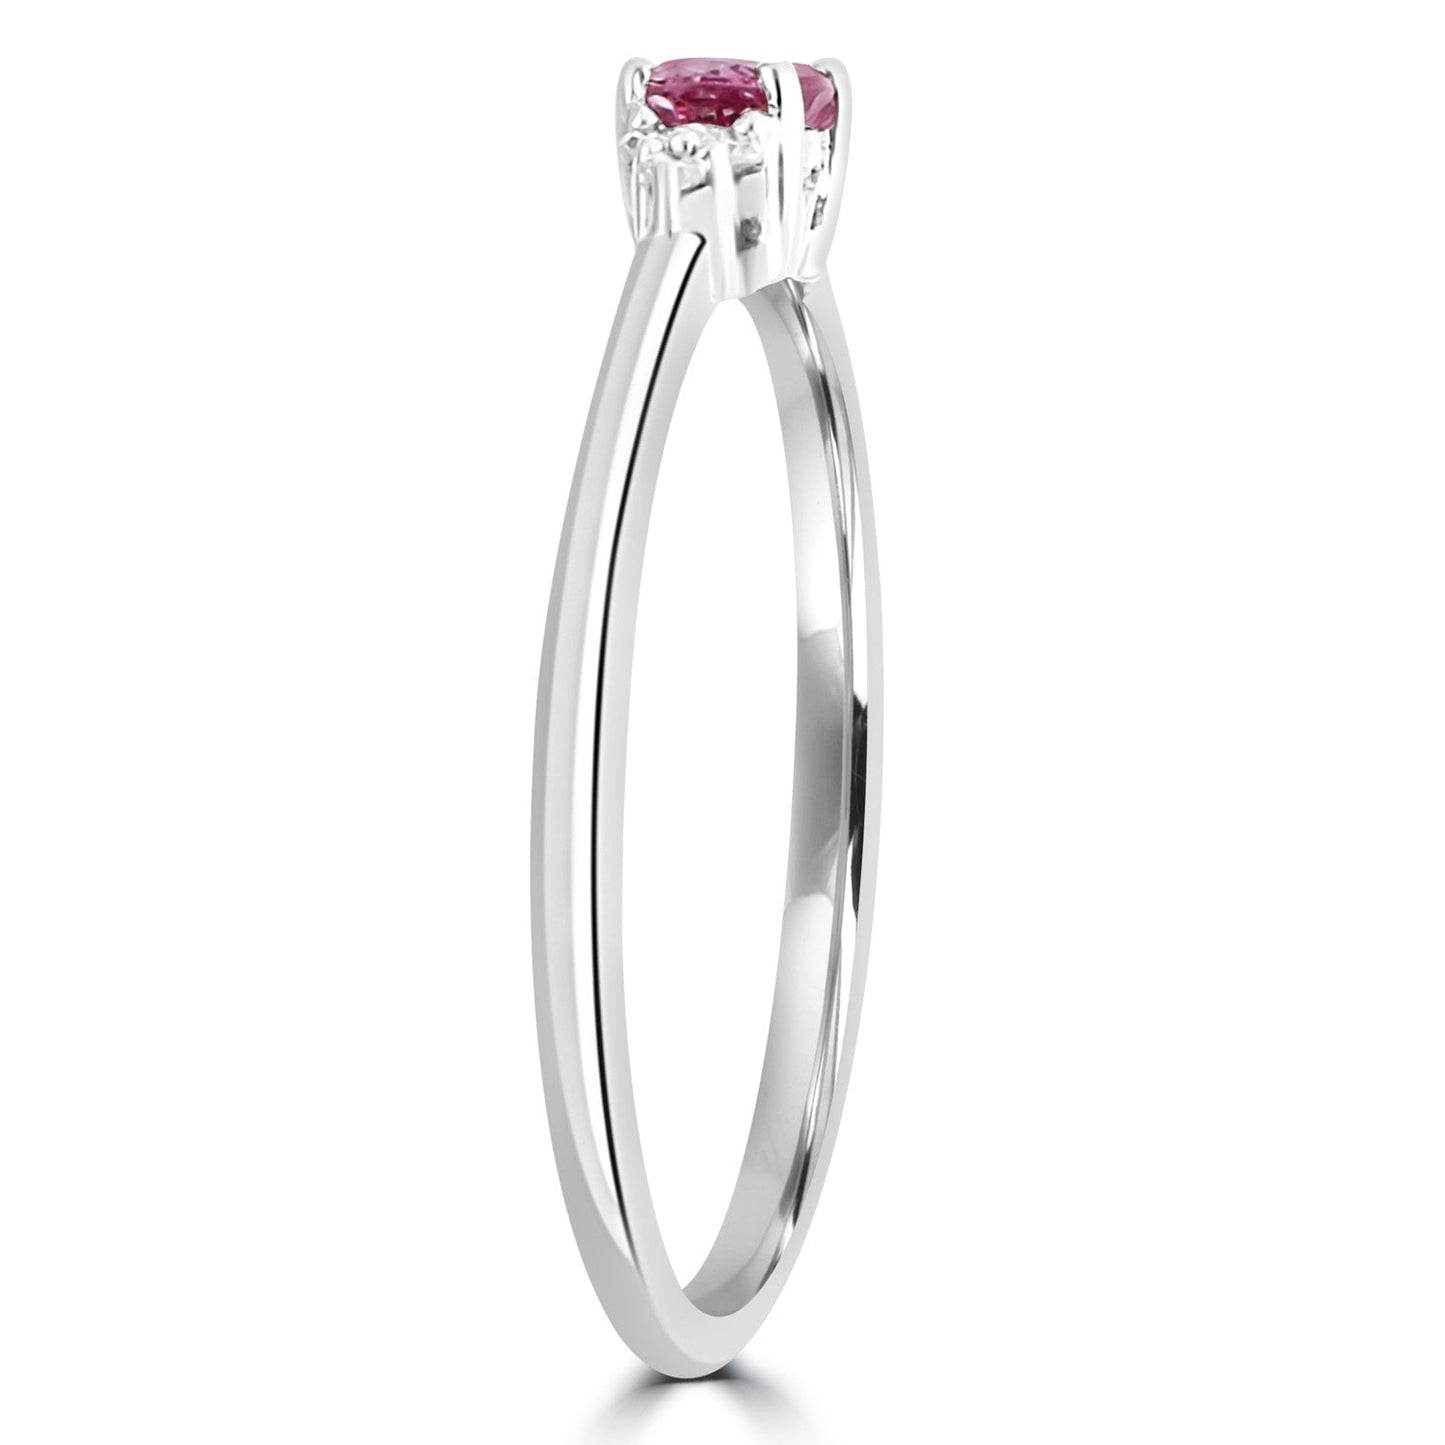 0.03ct HI I1 Diamond and Pink Sapphire Ring in 9K White Gold